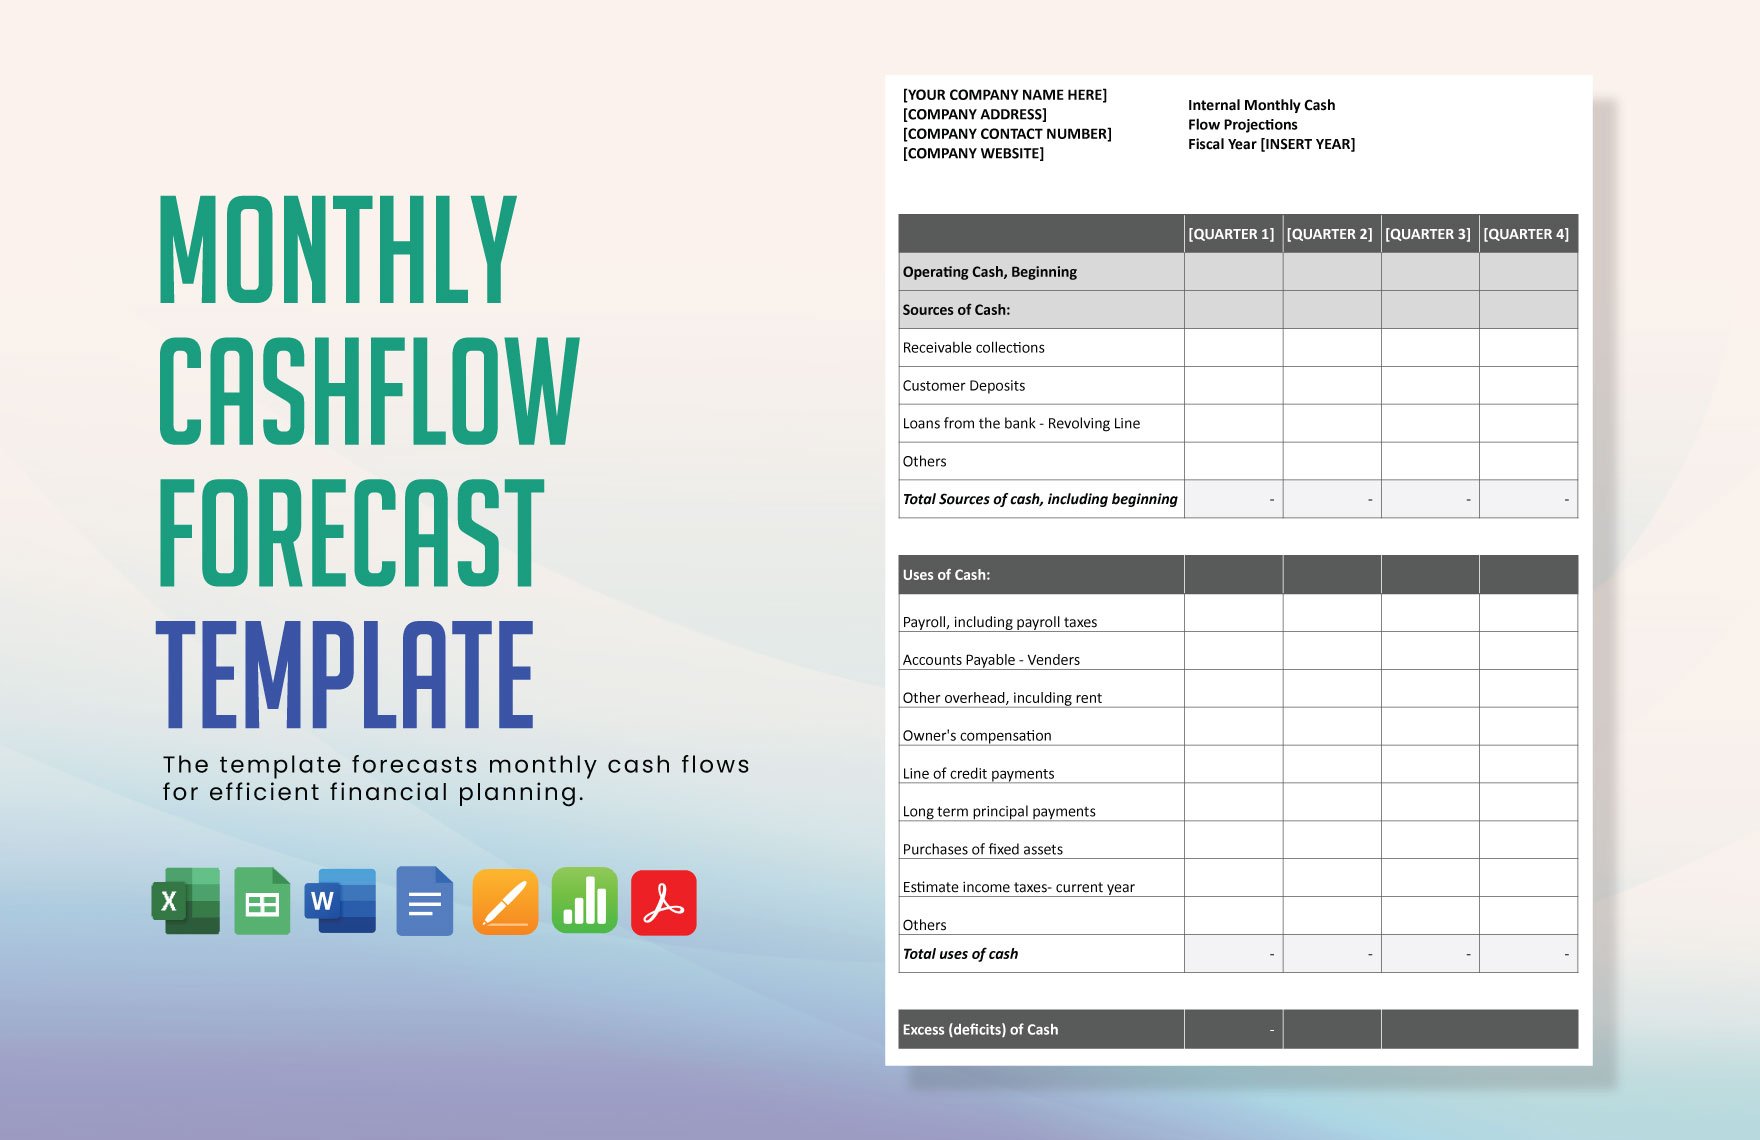 Monthly Cash Flow Forecast Template